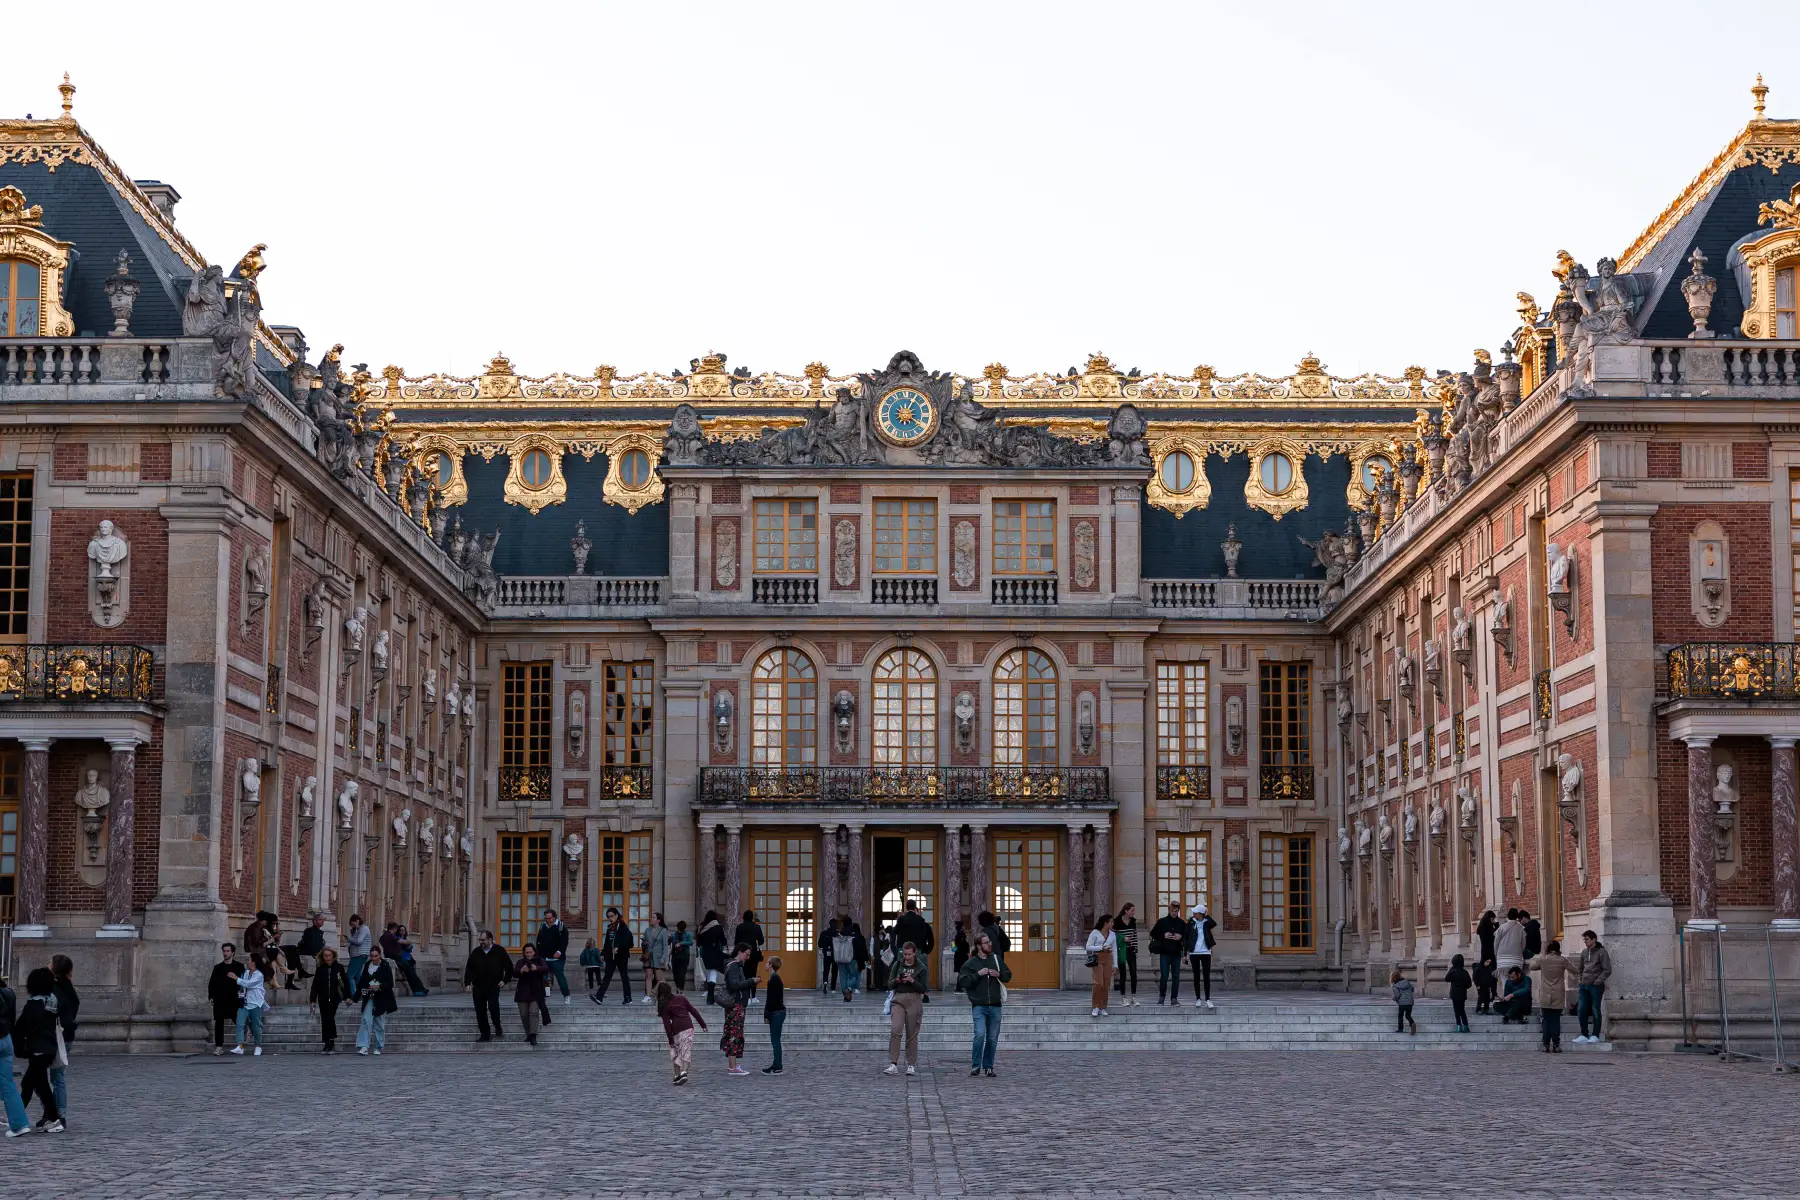 exterior shot of the main entrance of the Palace of Versailles